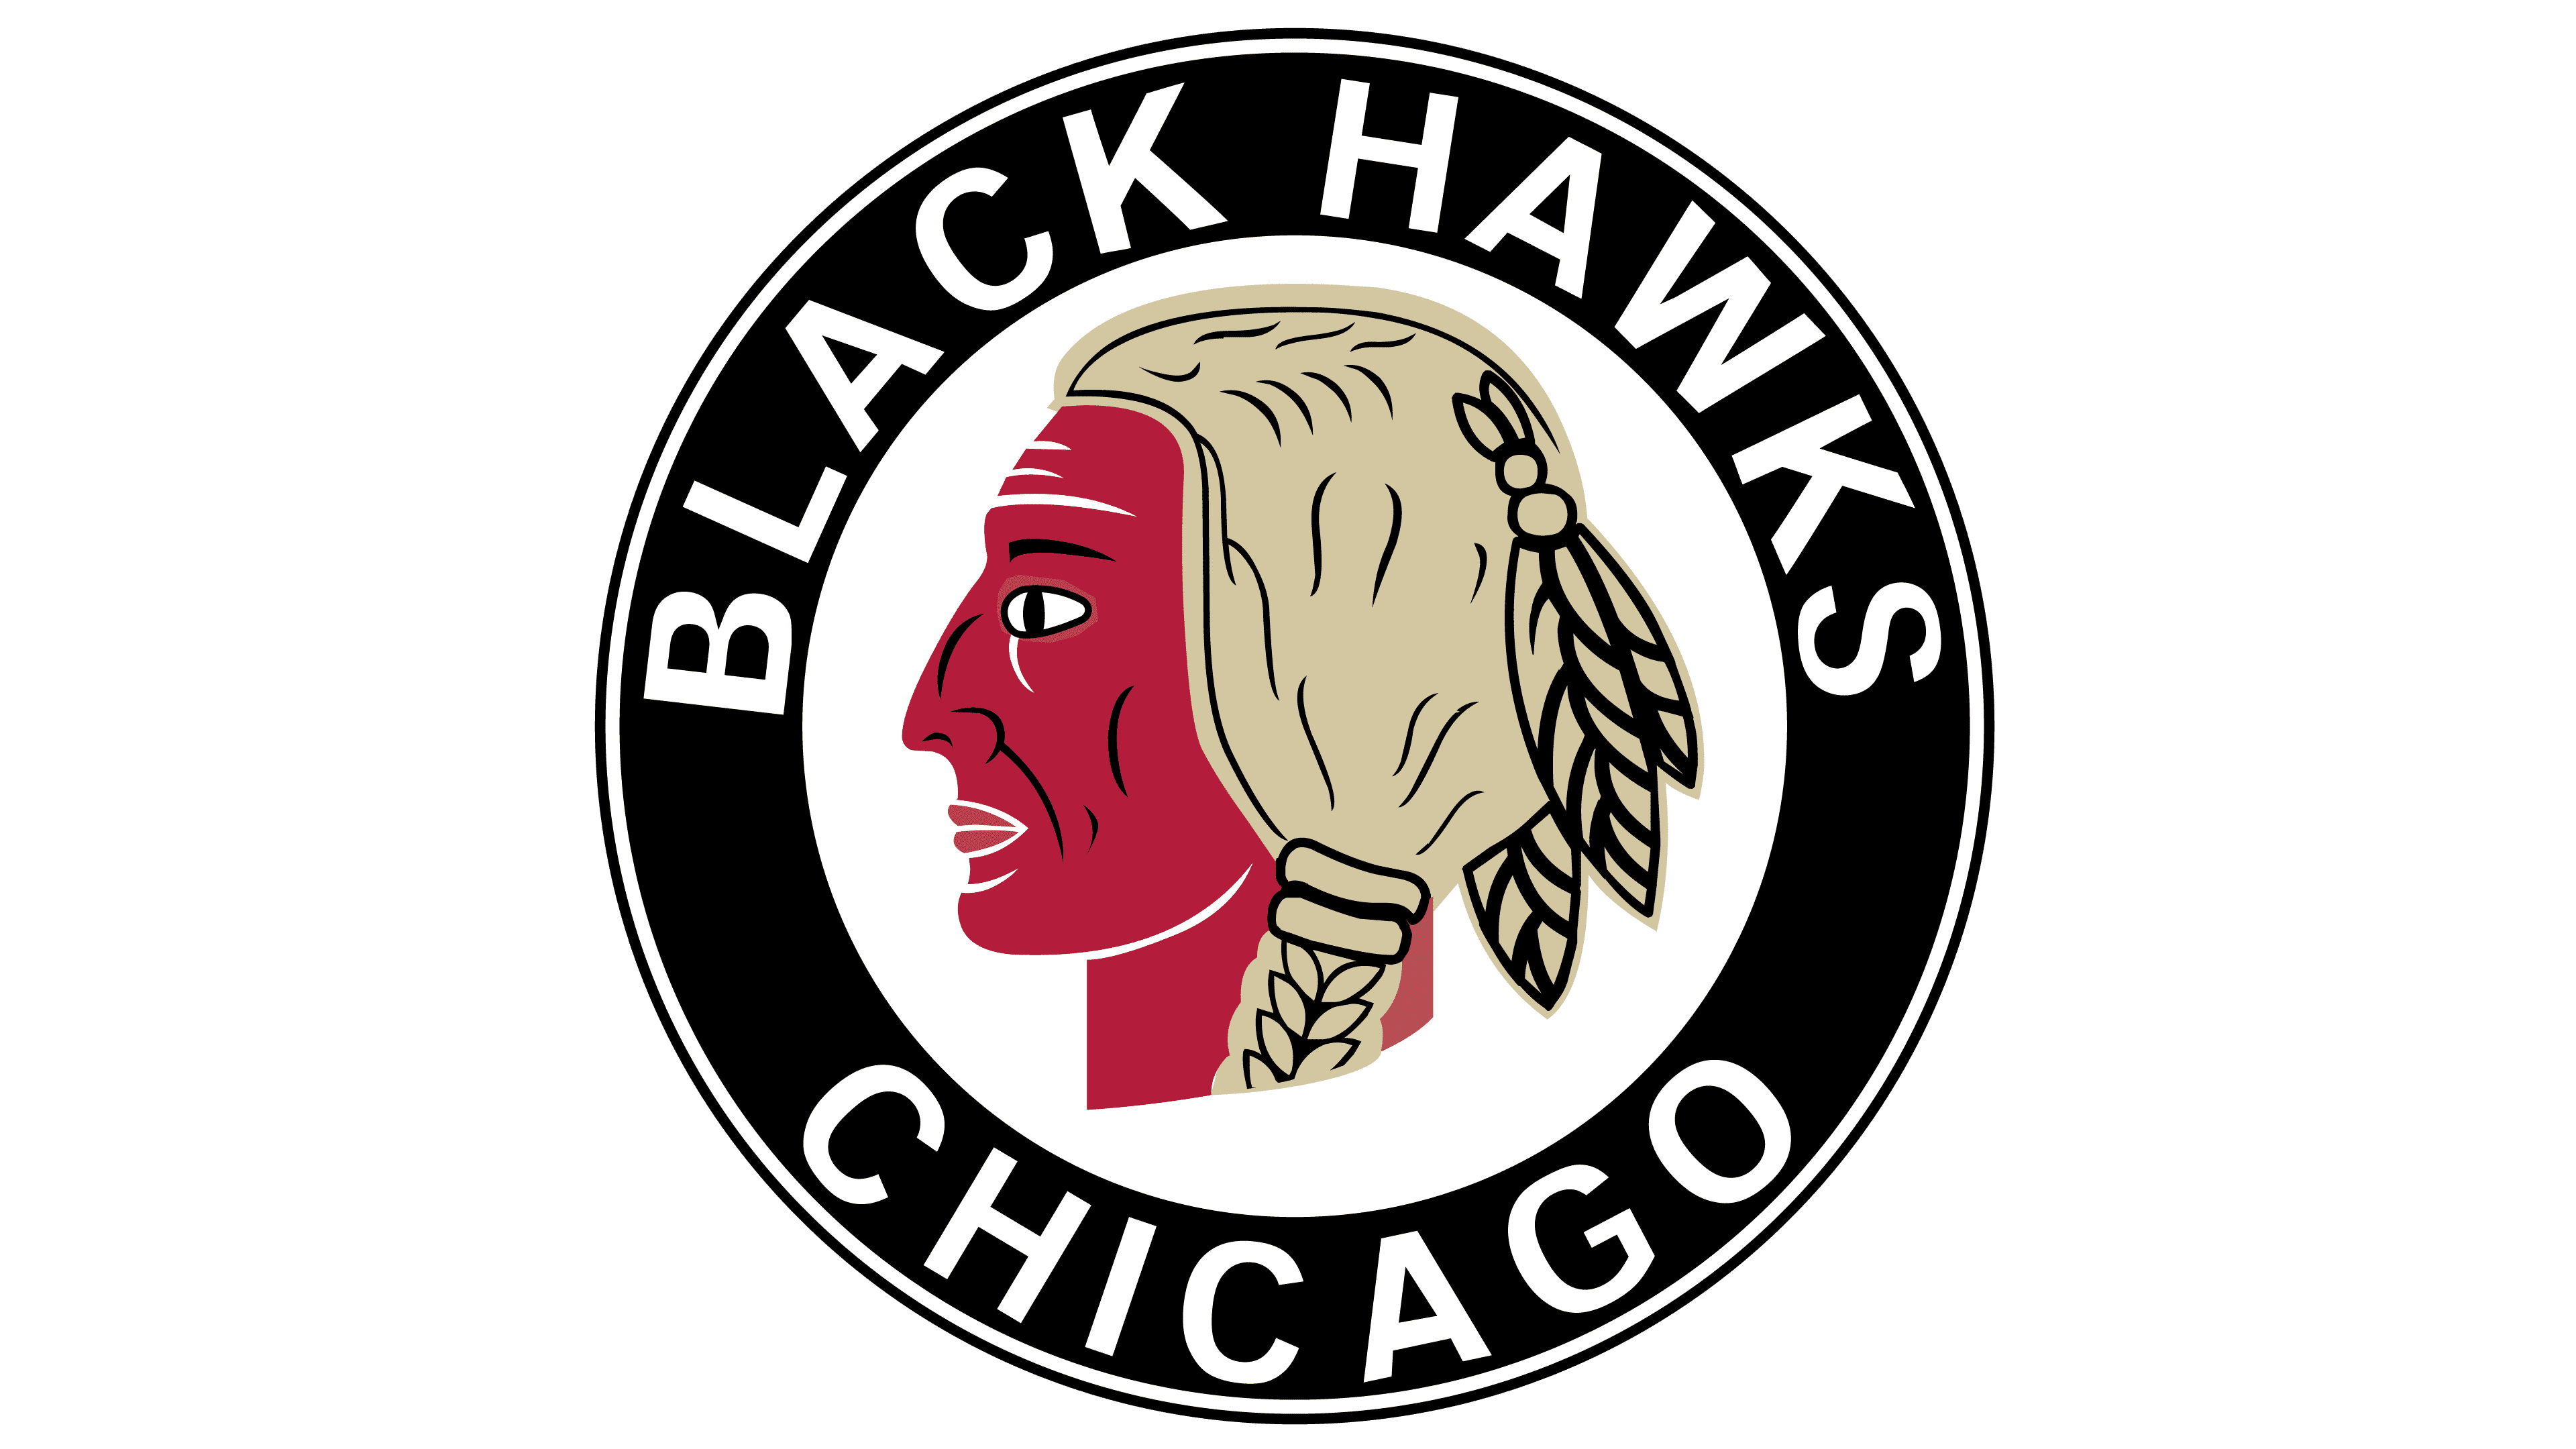 Blackhawks logo, name to stay, team will increase Native American